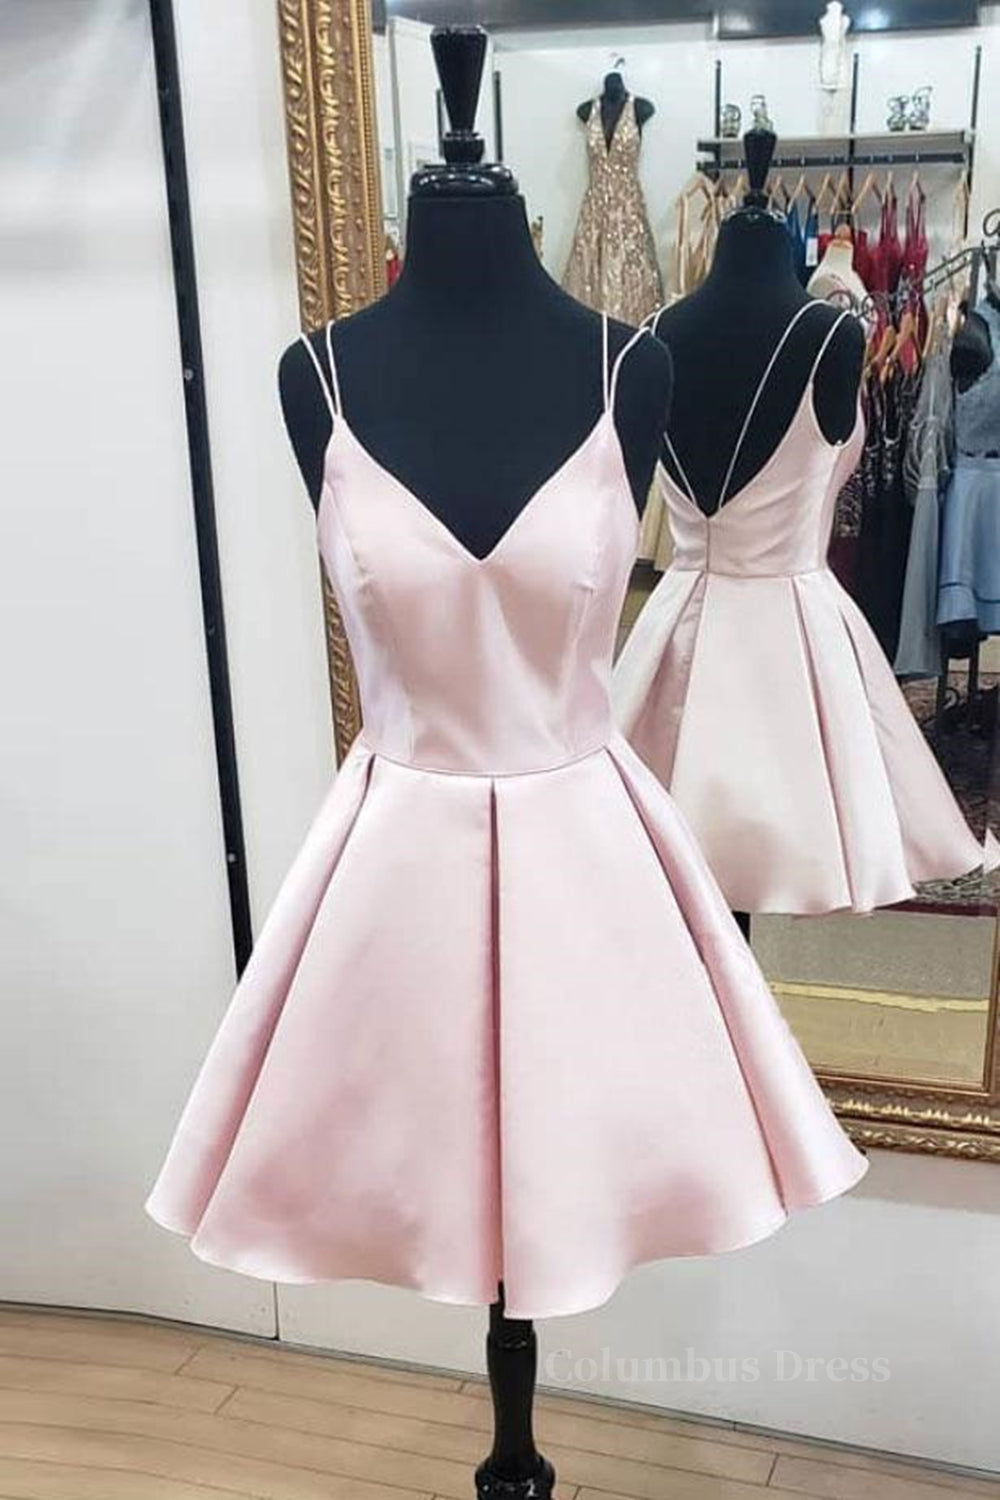 Cute V Neck Open Back Pink Short Corset Prom Dress, Backless Pink Corset Homecoming Dress, Short Pink Corset Formal Evening Dress outfit, Evening Dress Gowns